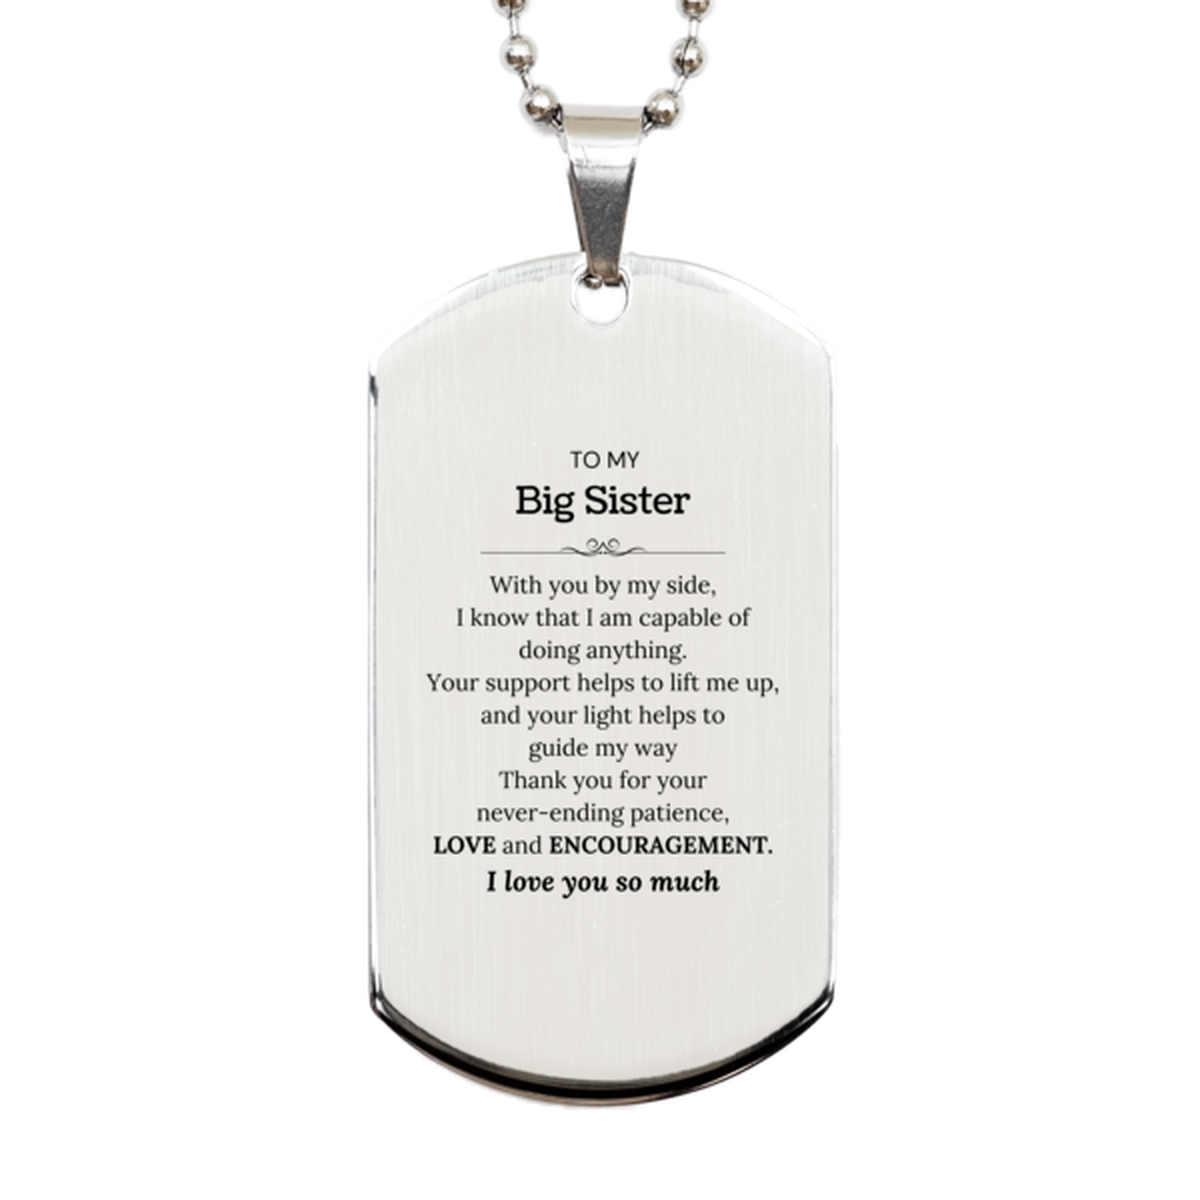 Appreciation Big Sister Silver Dog Tag Gifts, To My Big Sister Birthday Christmas Wedding Keepsake Gifts for Big Sister With you by my side, I know that I am capable of doing anything. I love you so much